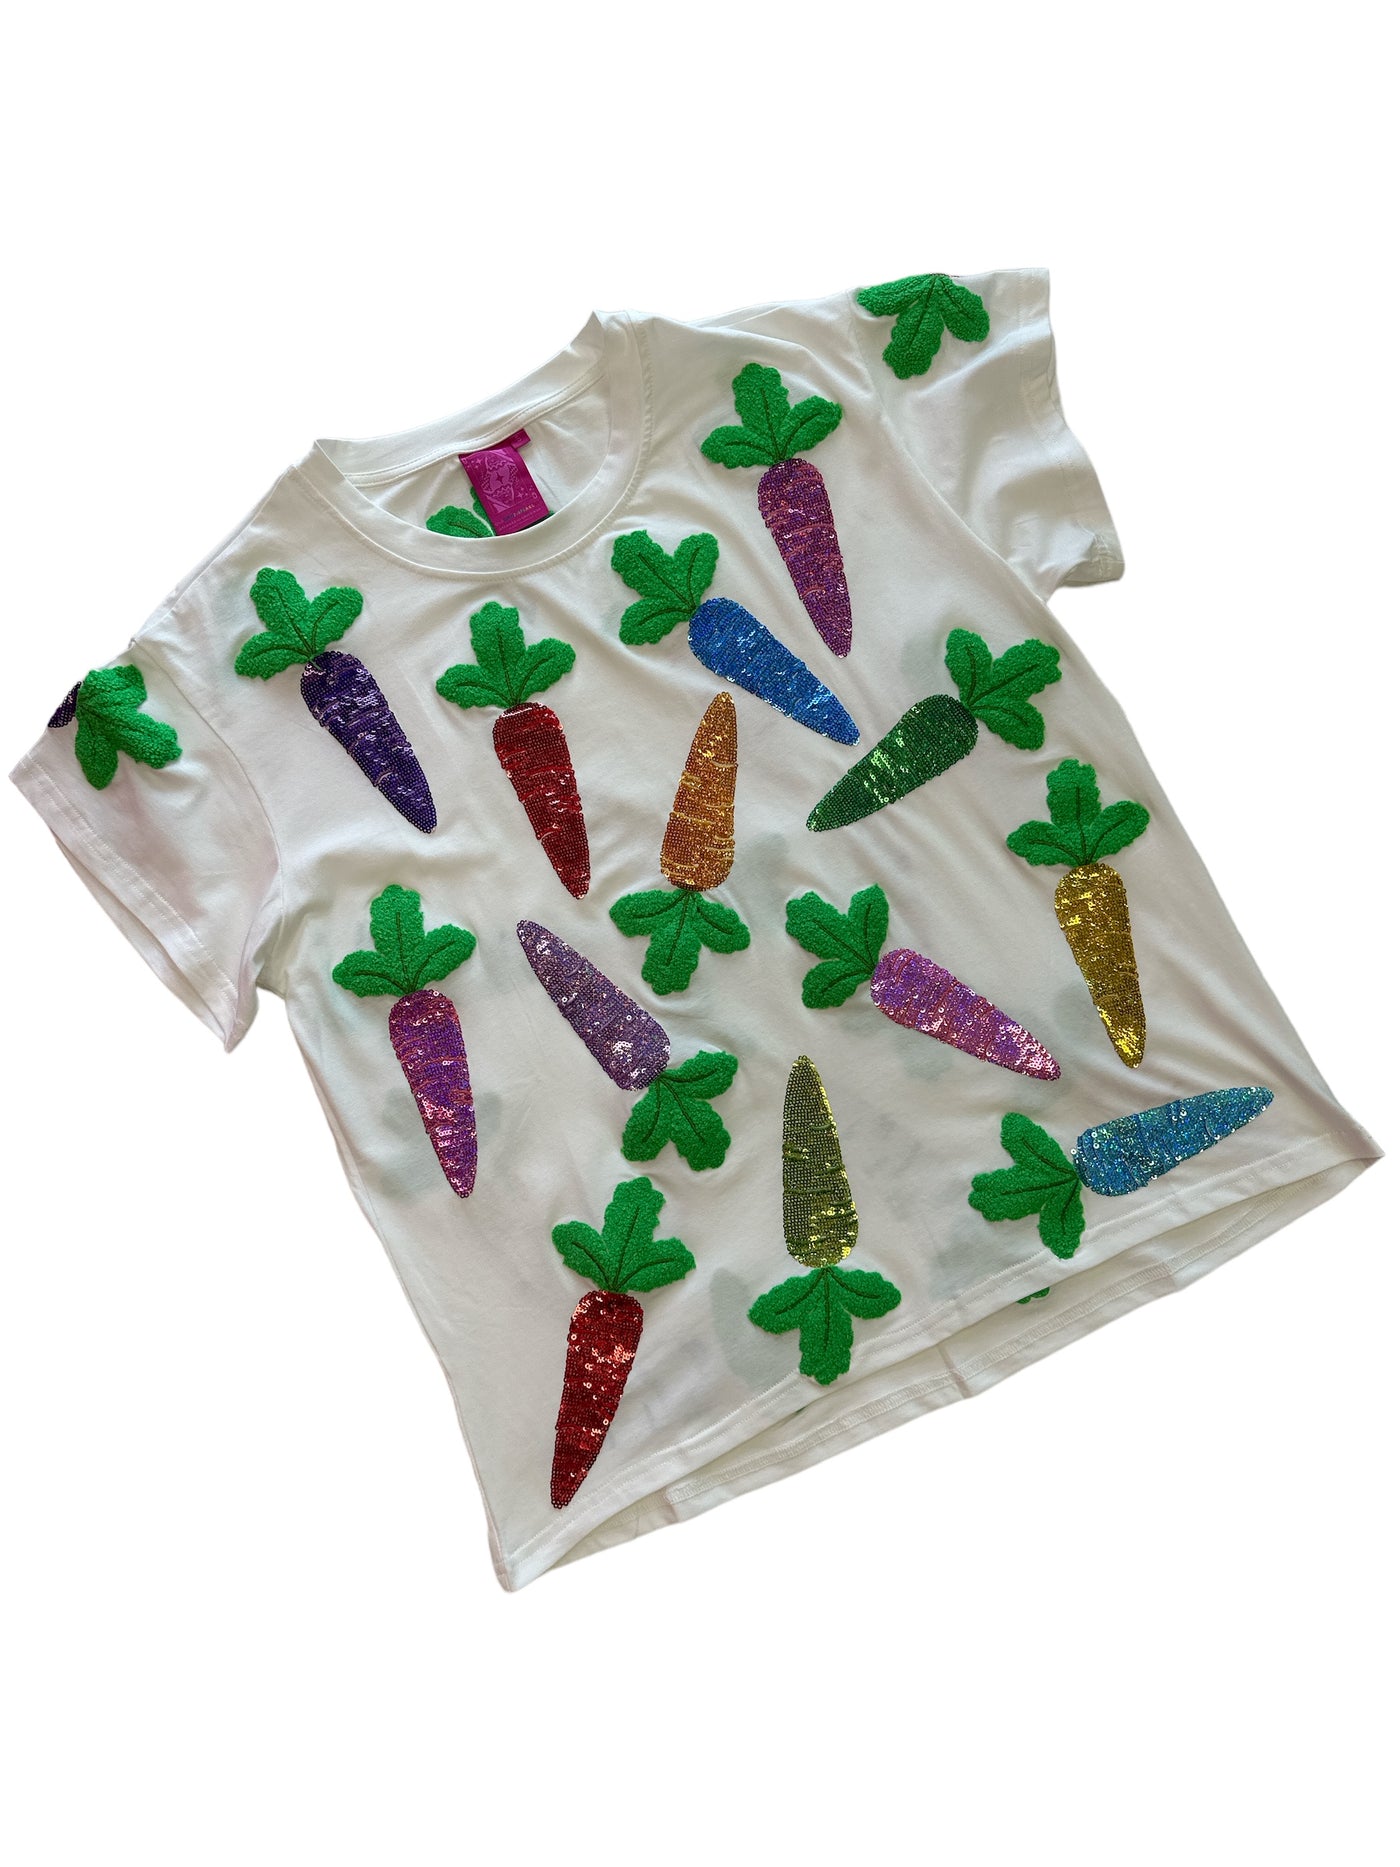 Queen of Sparkles - Easter Carrot Tee